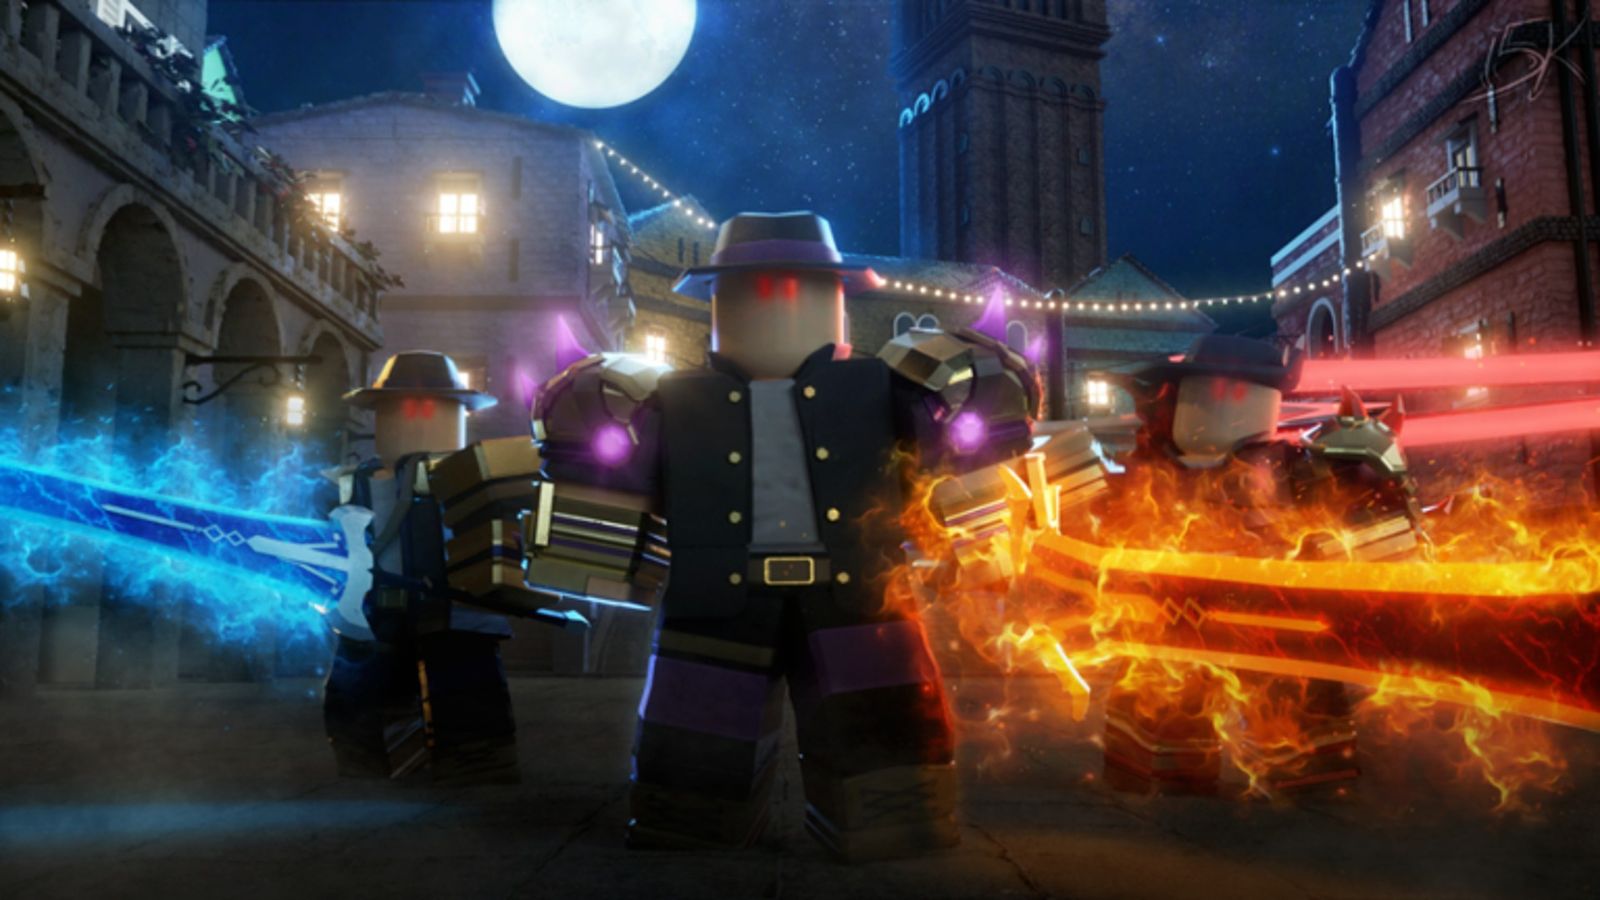 Image from Dungeon Quest showing three suit-clad Roblox characters wielding weapons